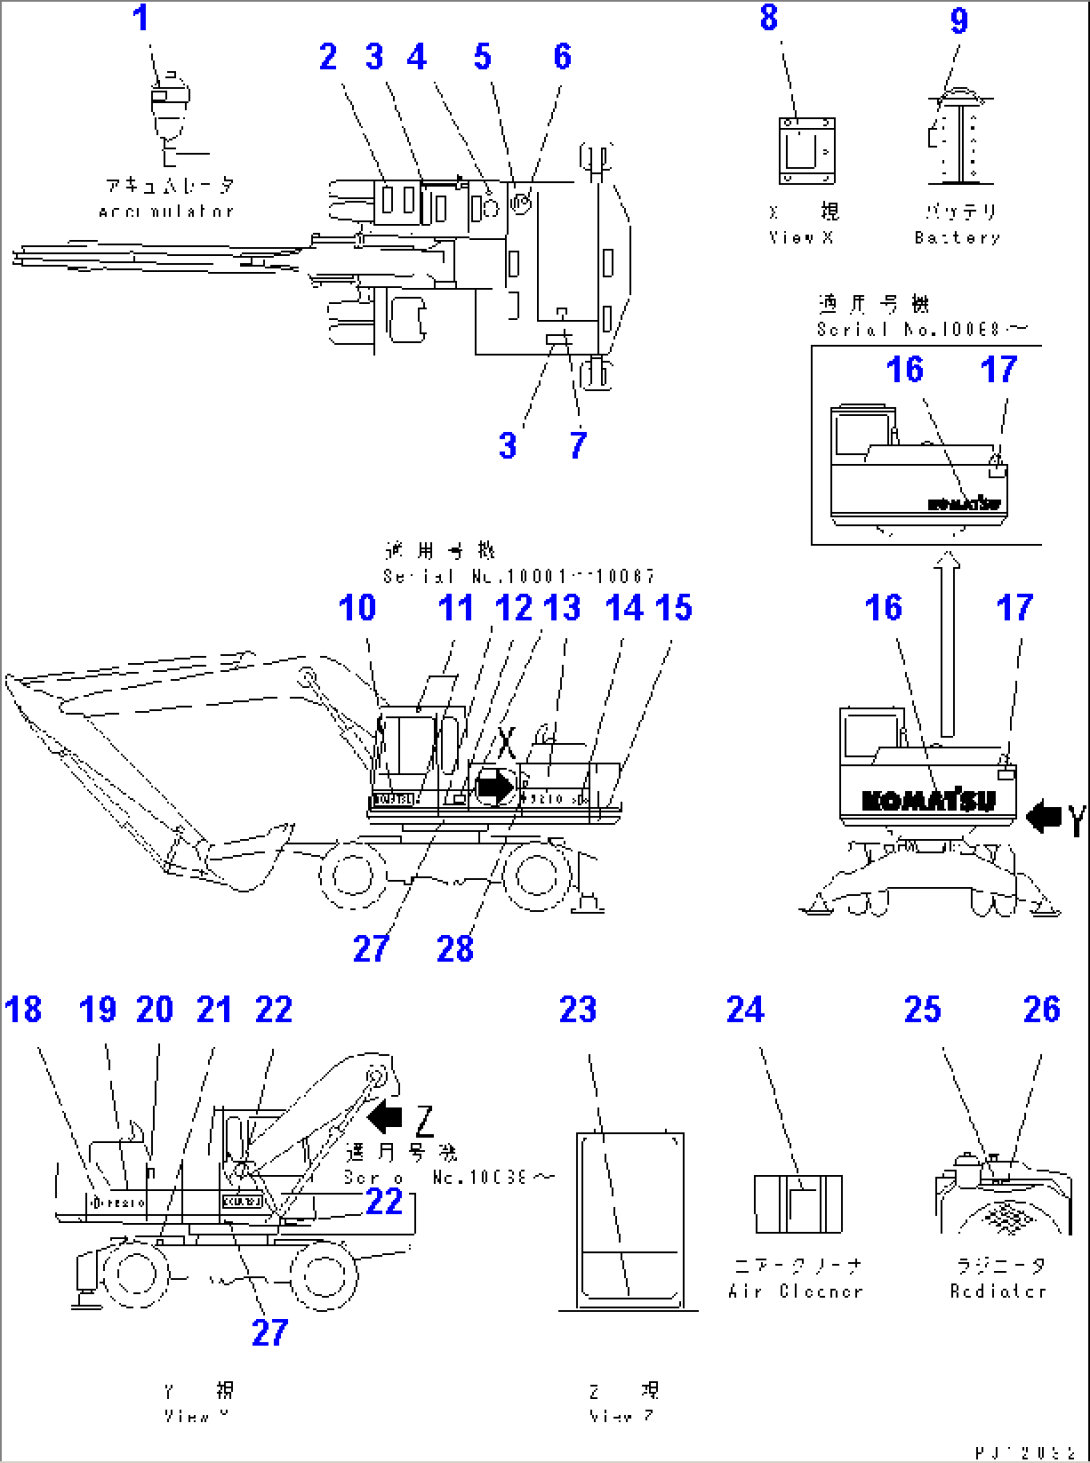 MARKS AND PLATES (CHASSIS) (ENGLISH)